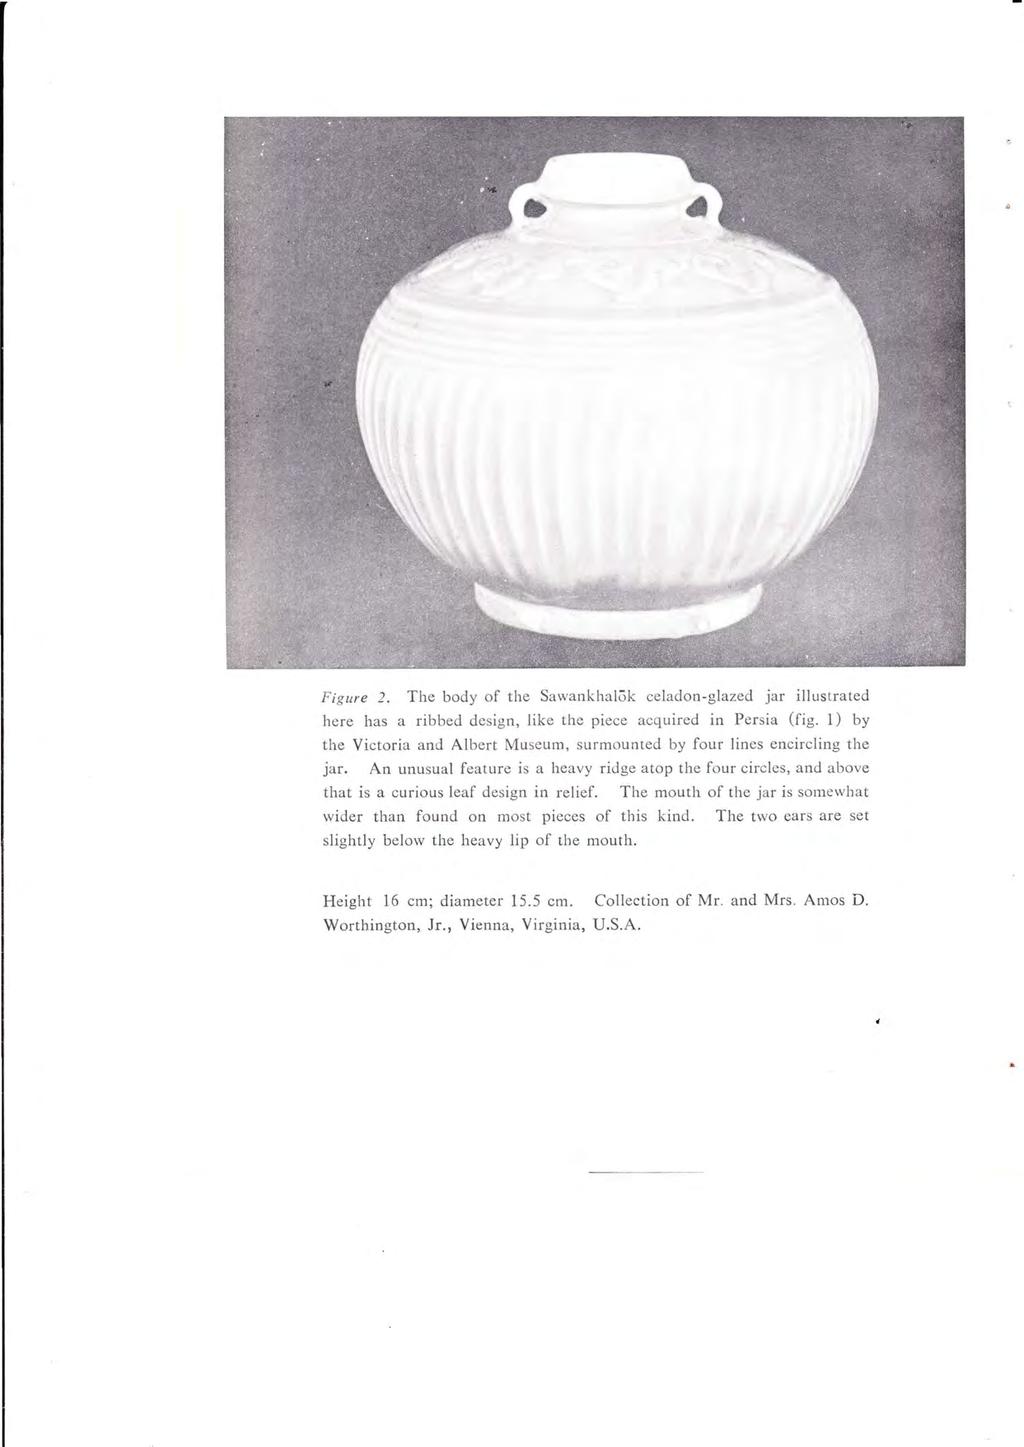 Figure 2. The body of the Sawankhalok celadon-glazed jar illustrated here has a ribbed design, like the piece acquired in Persia (fig.